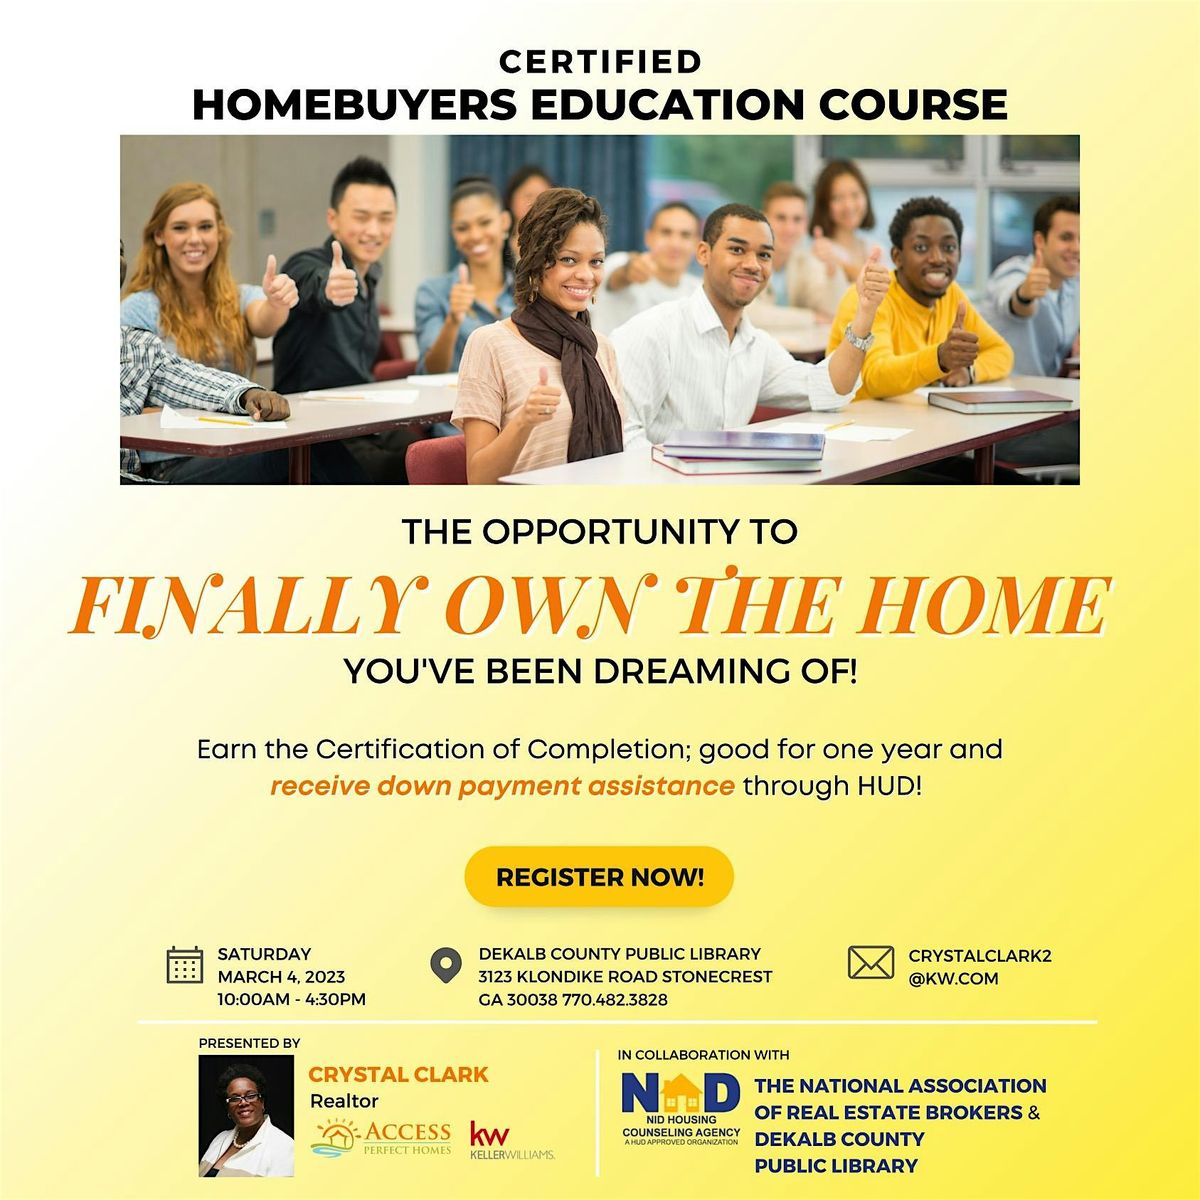 The Official Certified Homebuyers Education Course